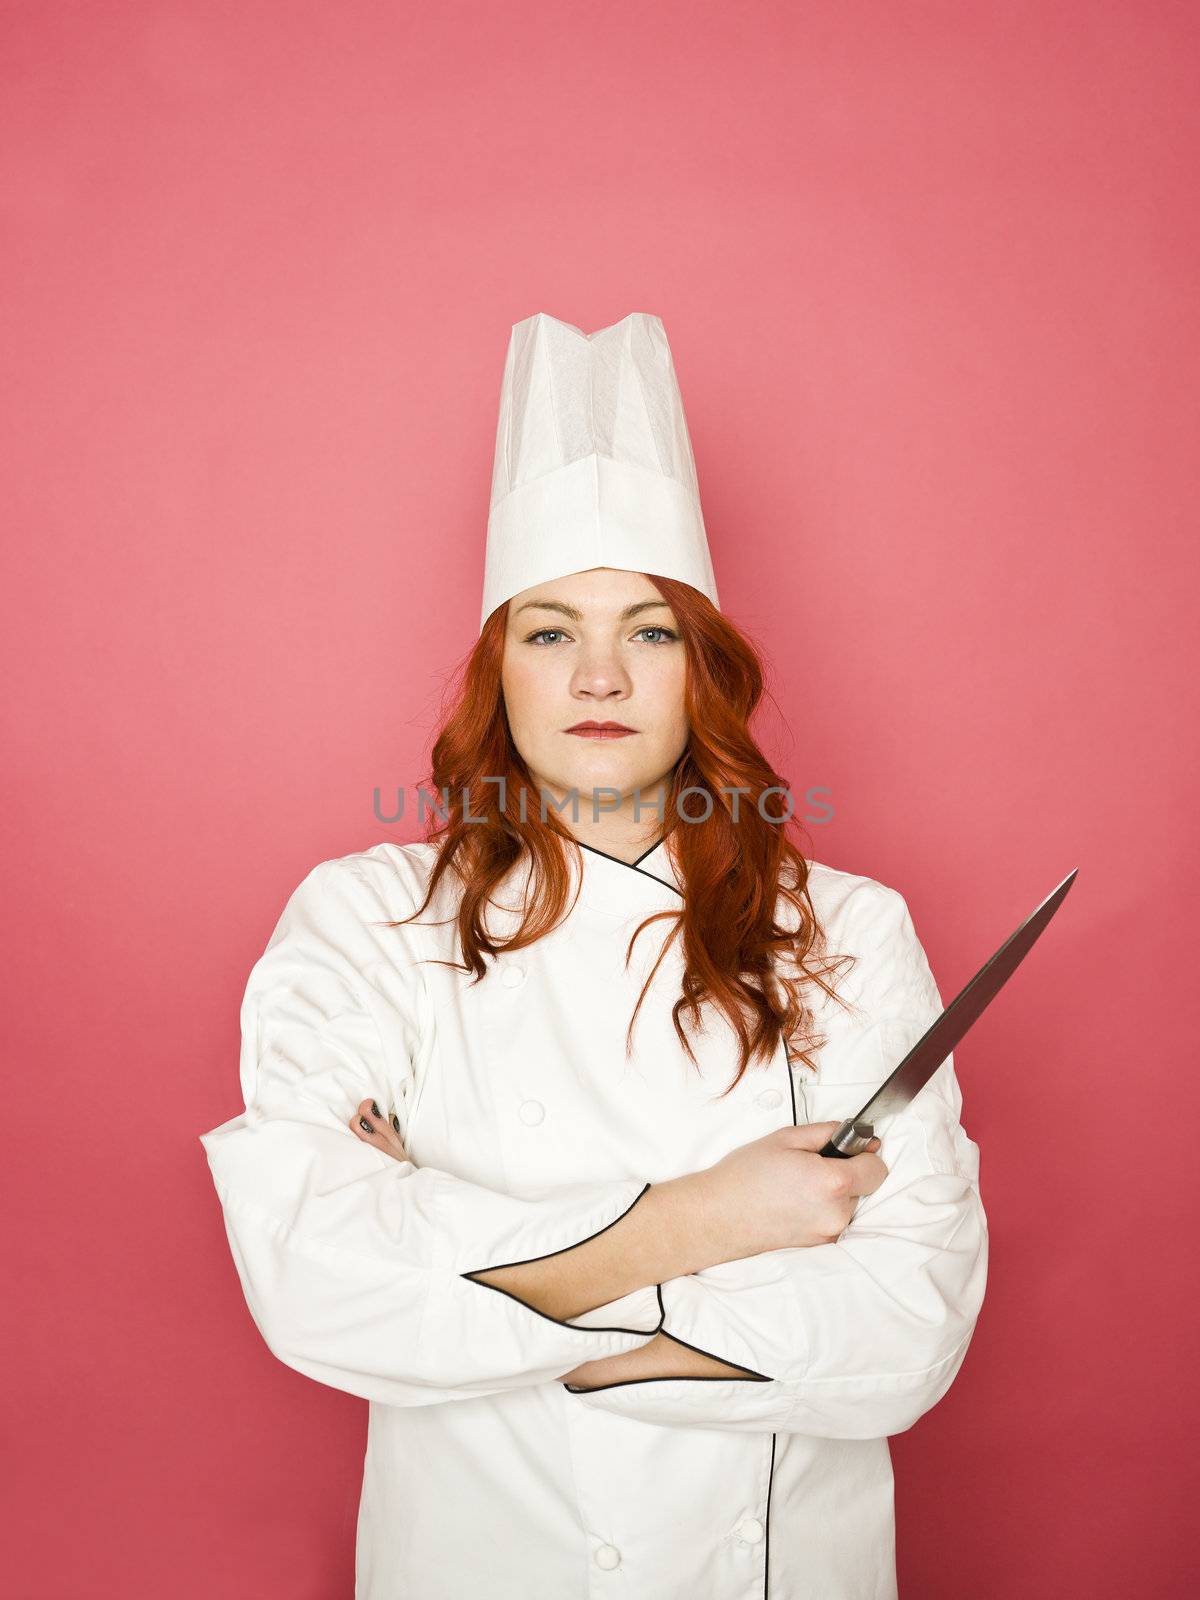 Female Chef on pink background